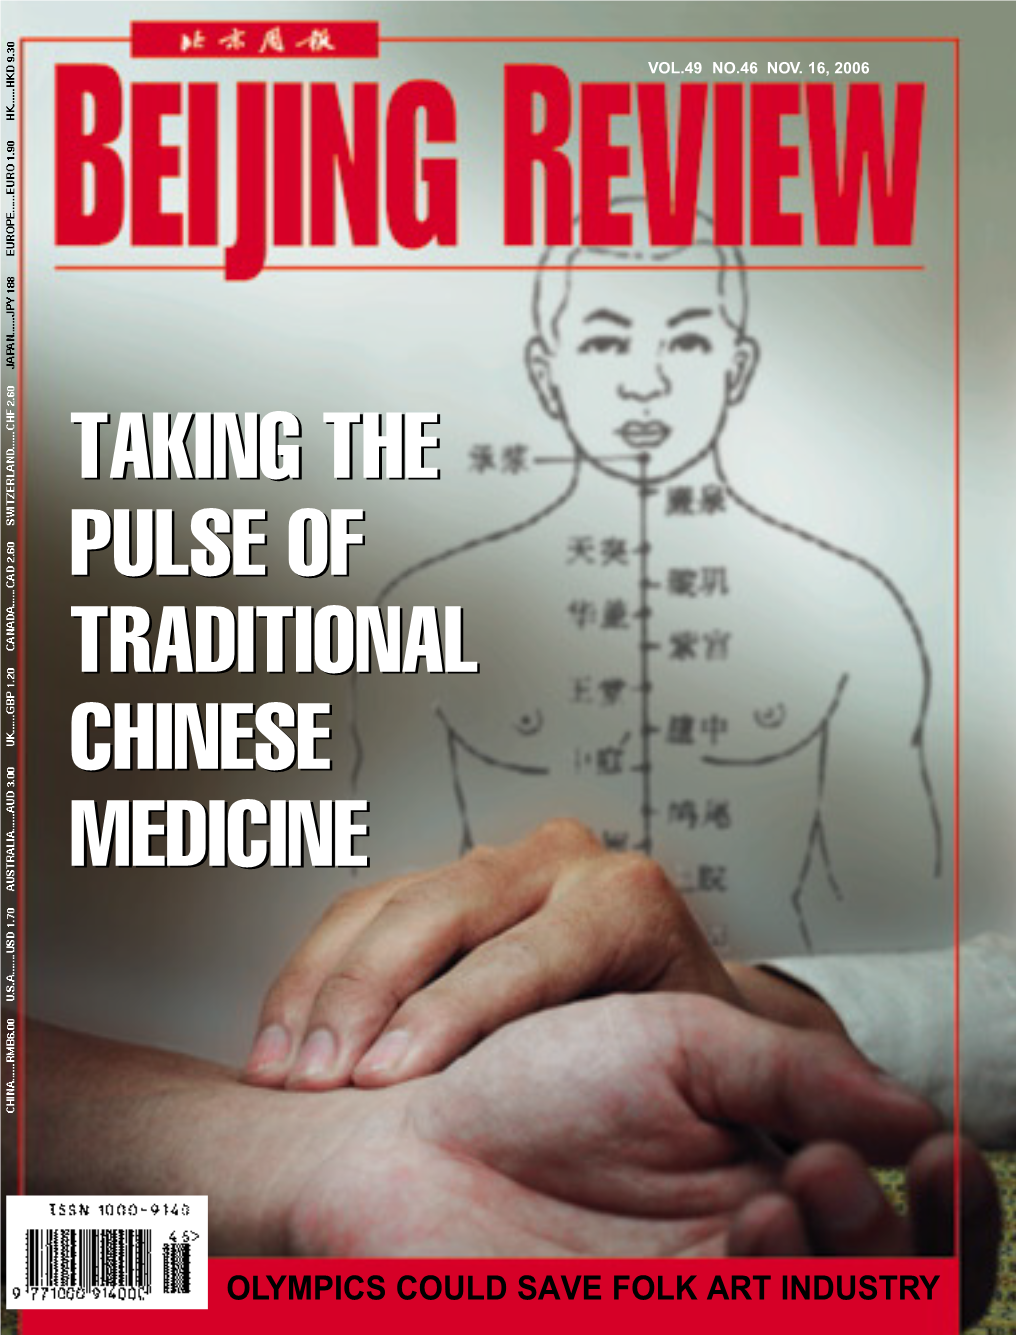 Beijing Review (ISSN 1000-9140) Is Published Weekly for US$64.00 Per Year by Cypress Book (U.S.) Co., Inc., 360 Swift Avenue, Suite 48, South San Francisco, CA 94080